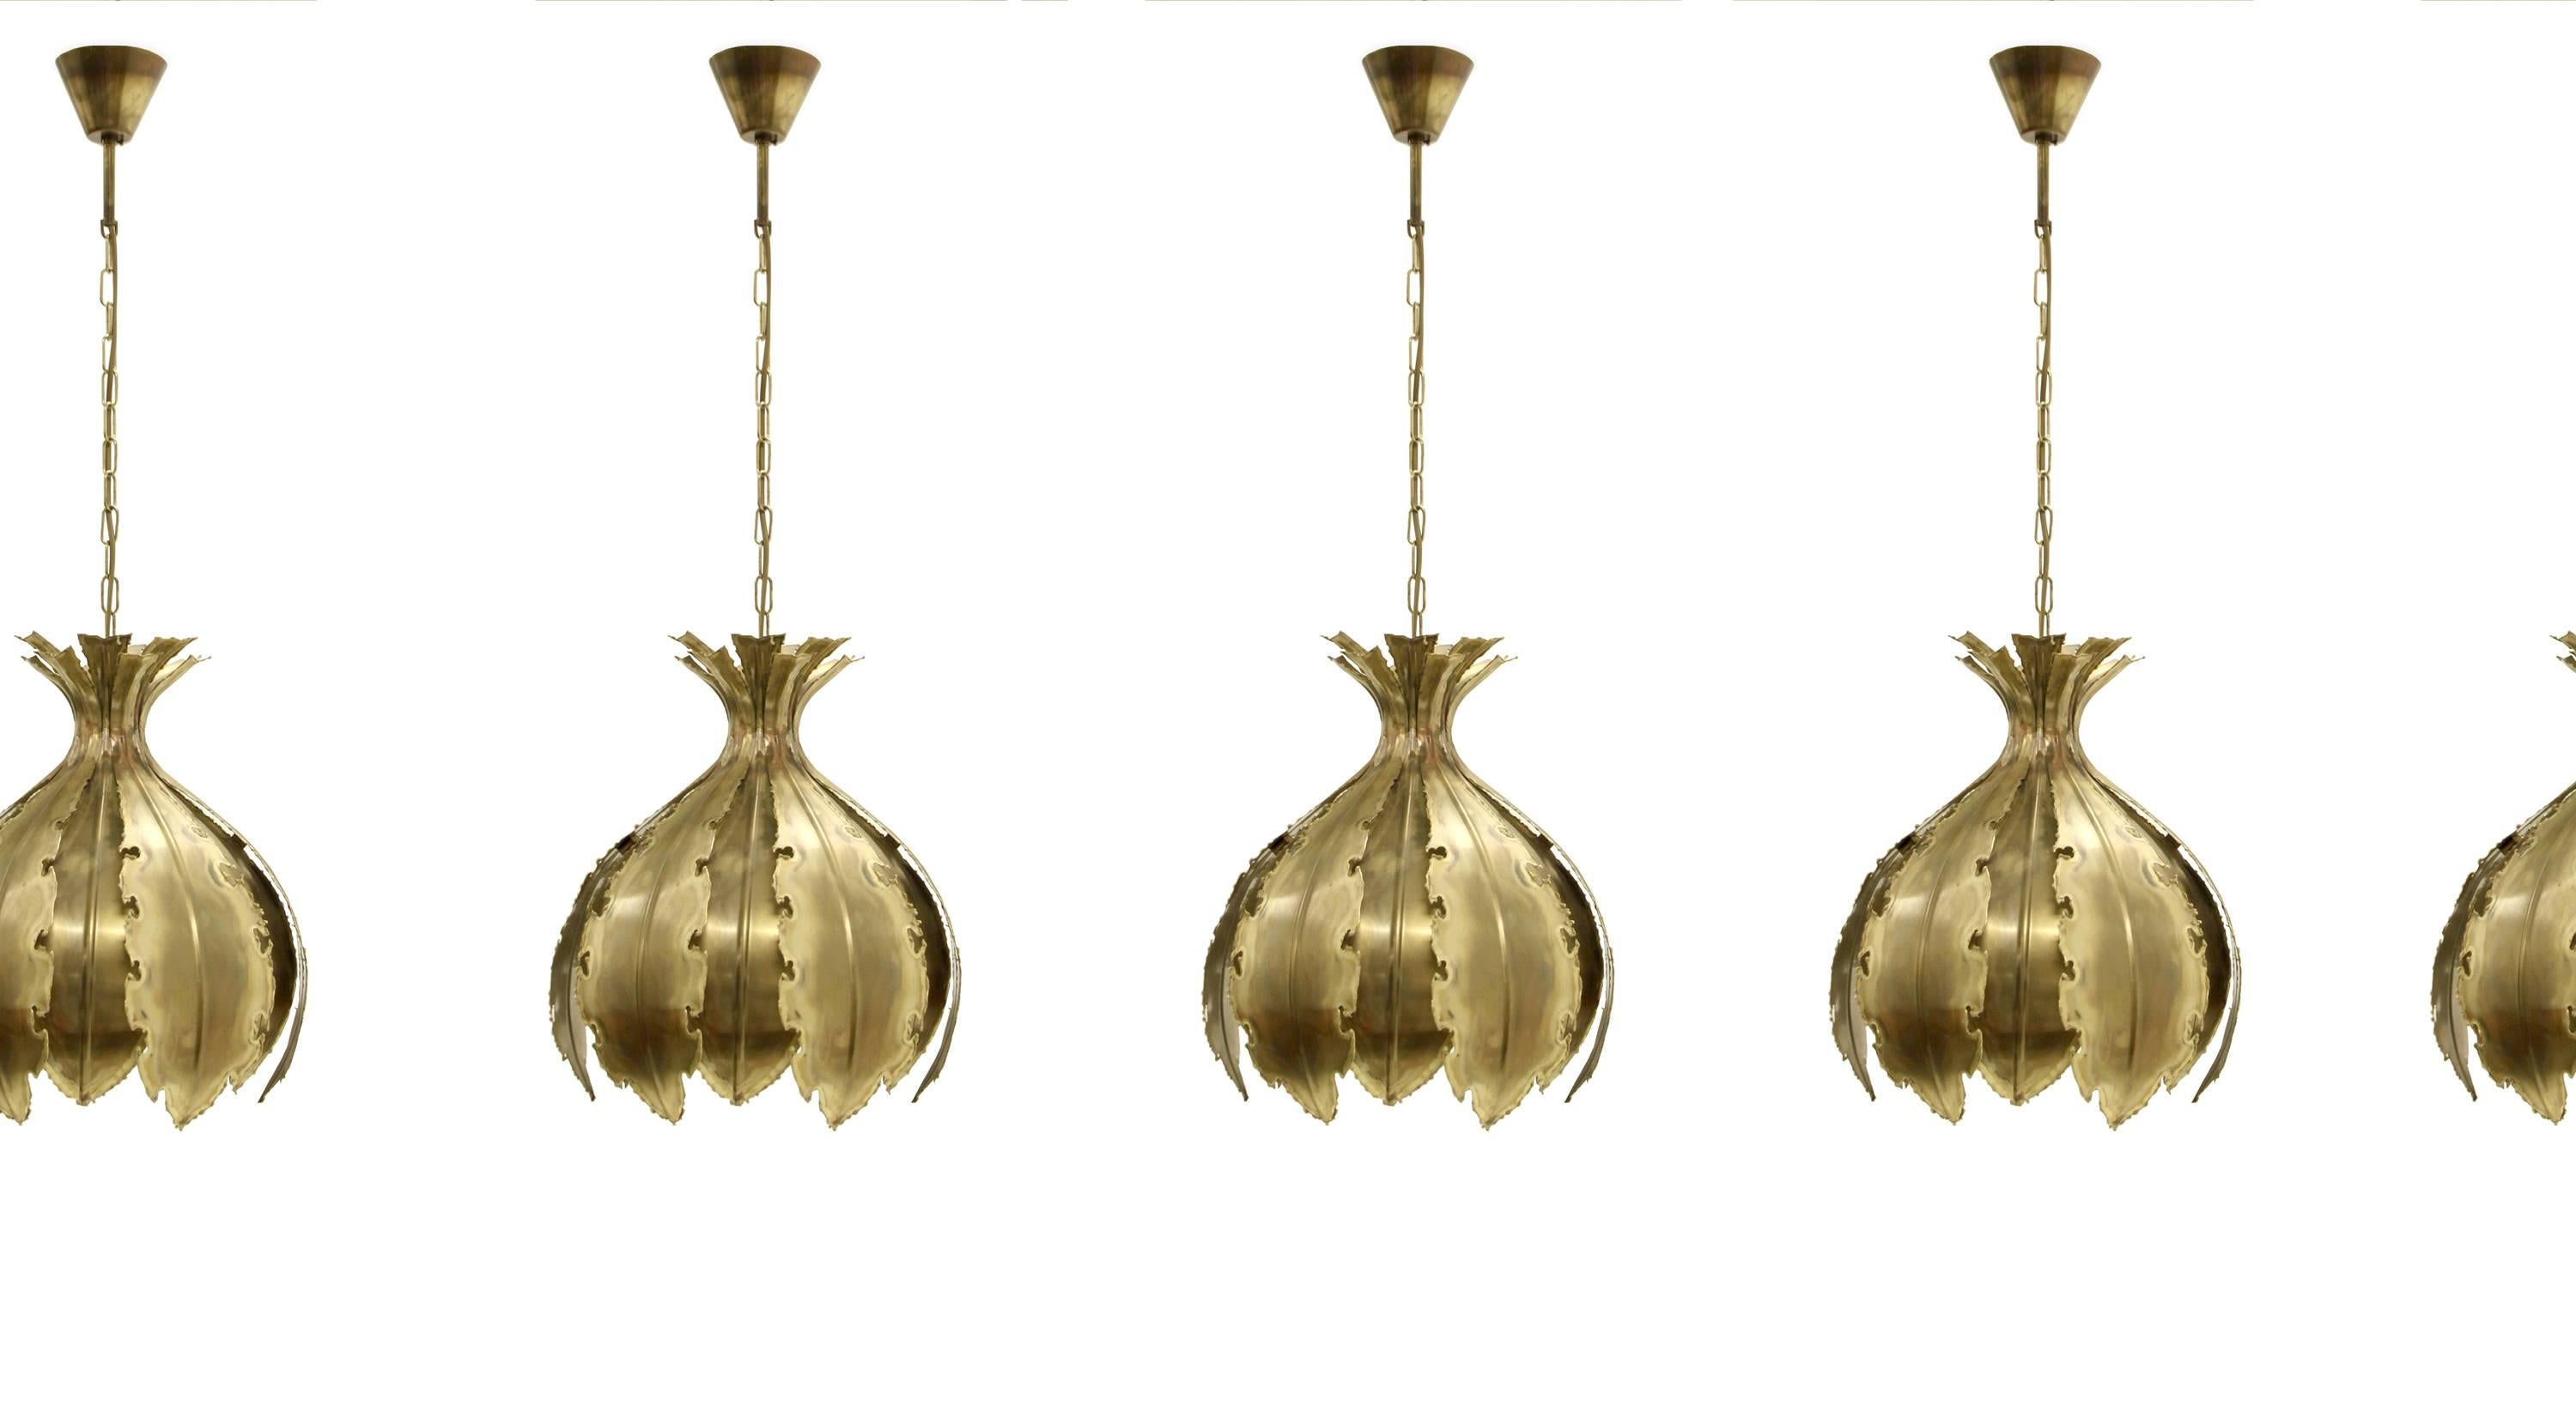 Large and decorative ceiling lamps on a patinated brass frame. Model 'Victoria' designed by Svend Aage Holm and made in Denmark, by Holm Sorensen & Co. from, circa 1970s second half. All lamps are fully working and in excellent vintage